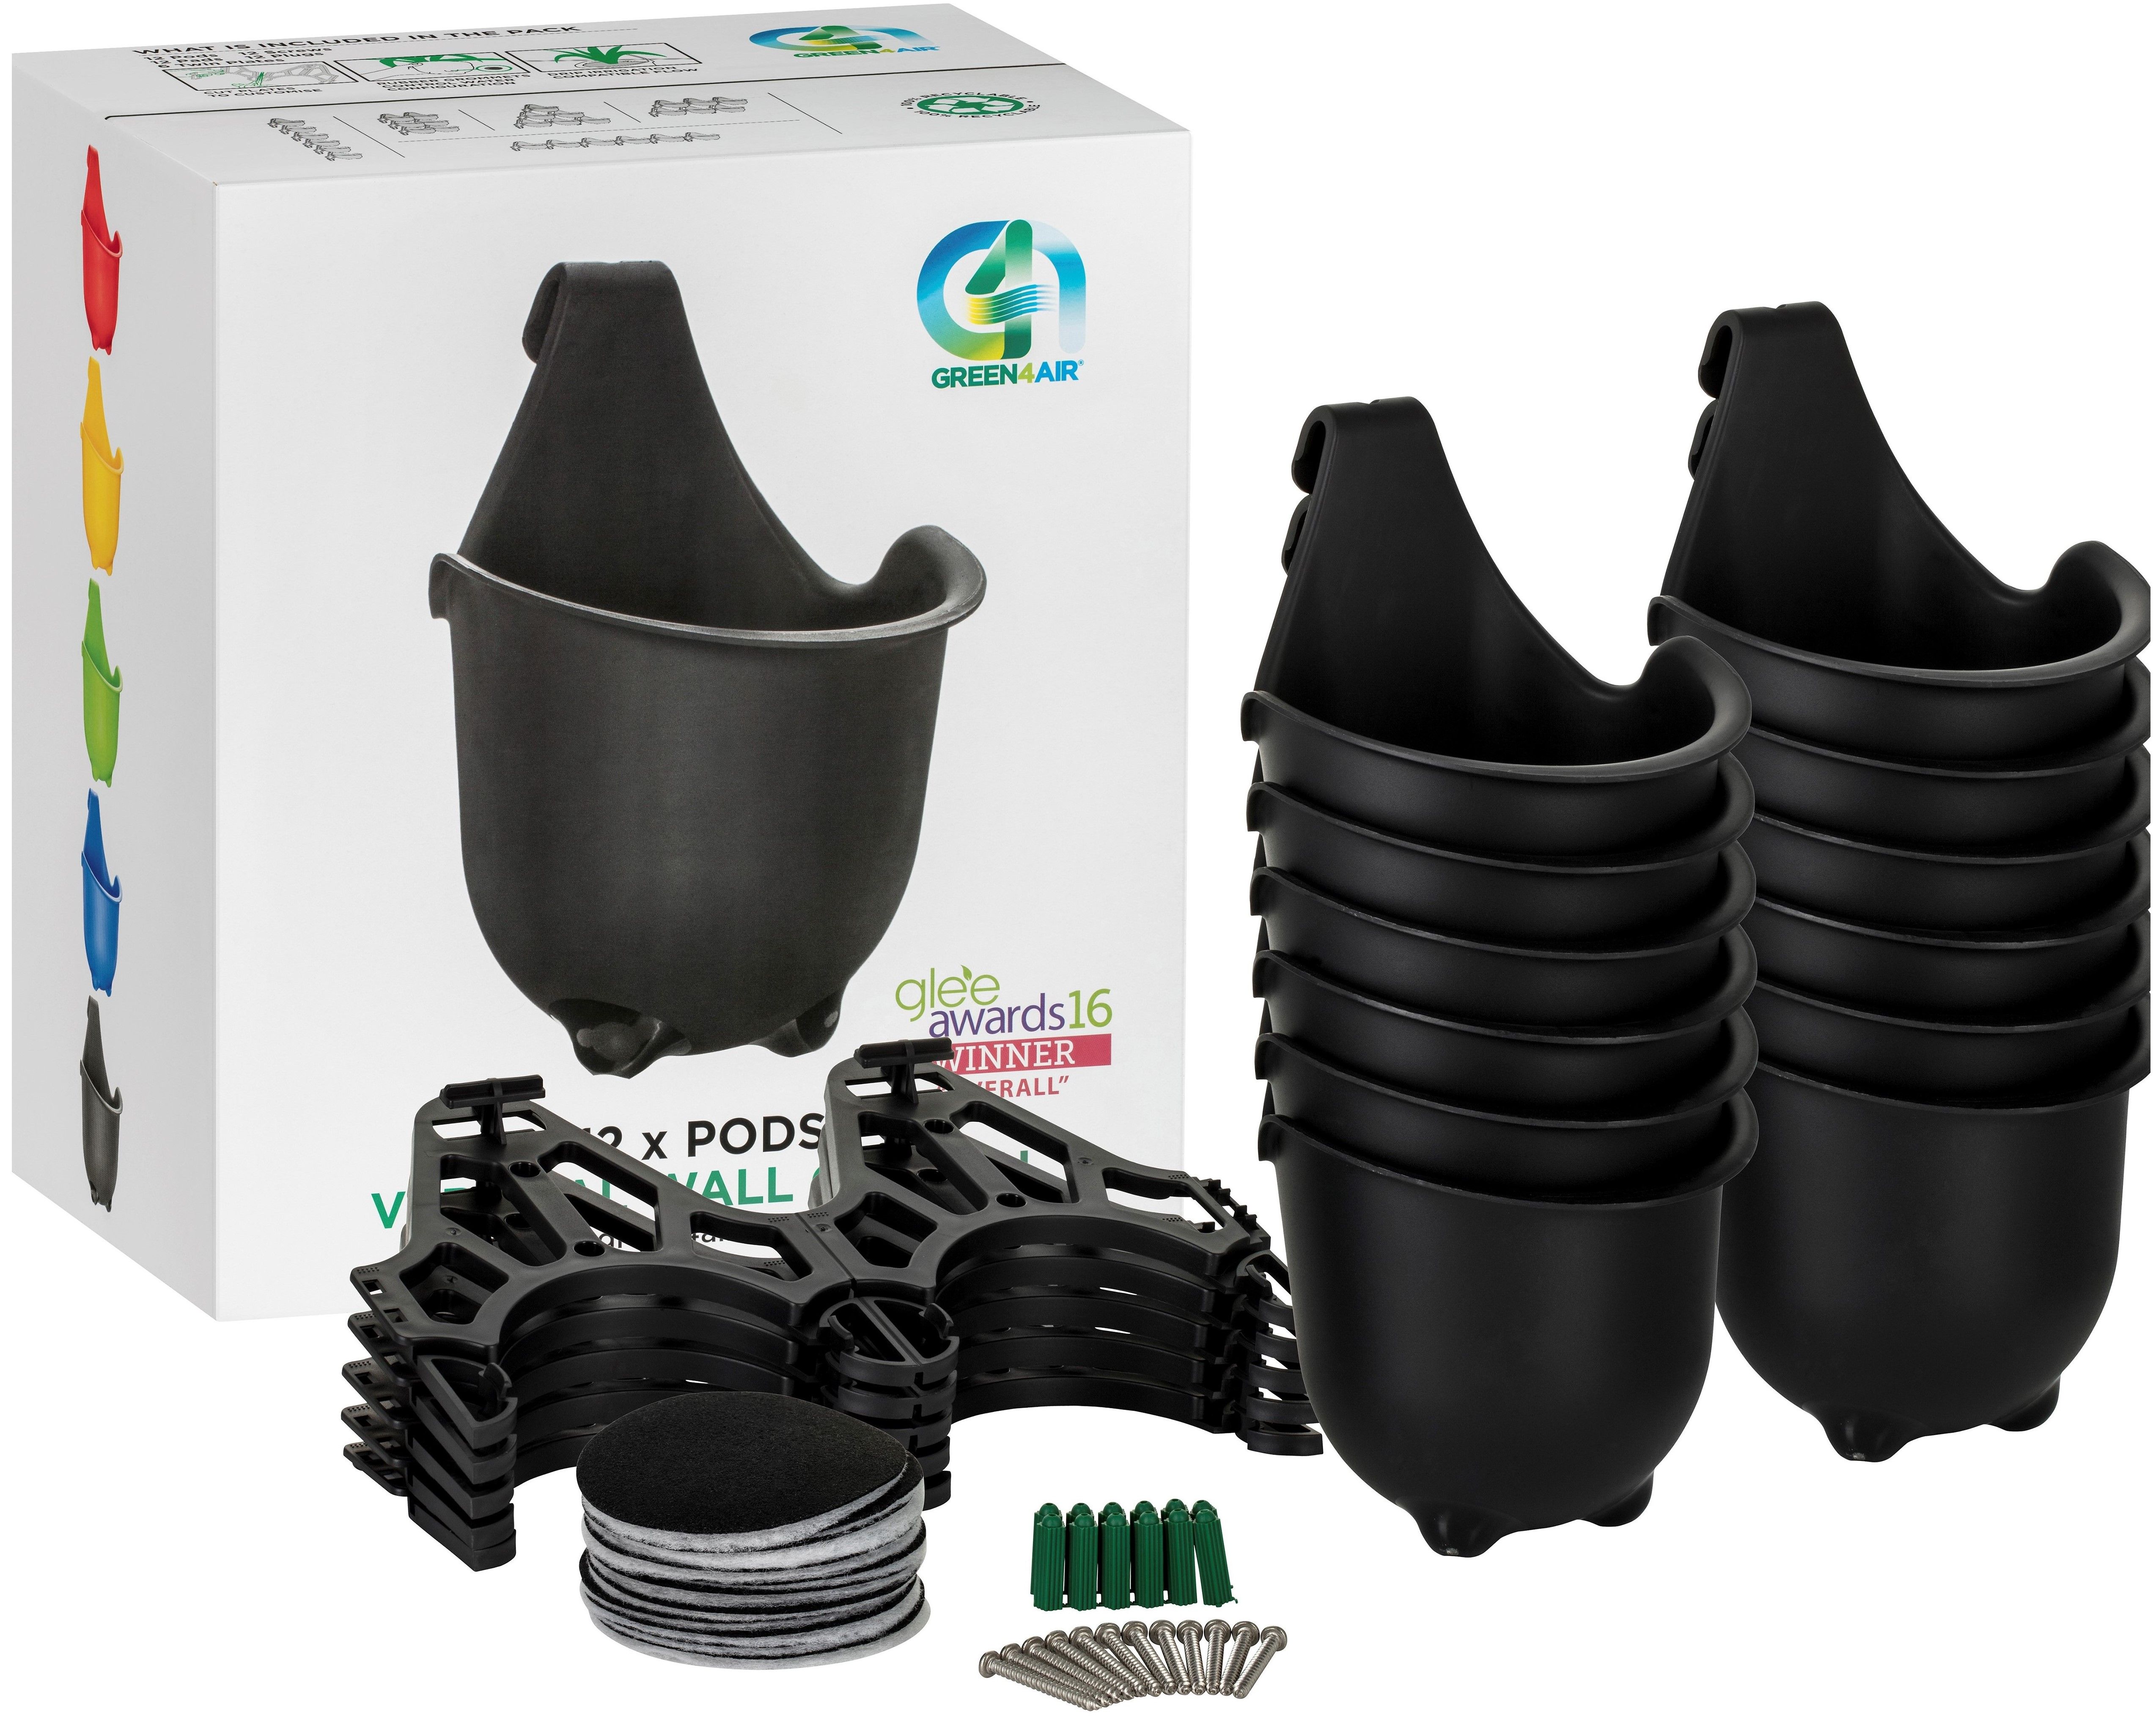 Green4Air Growing System